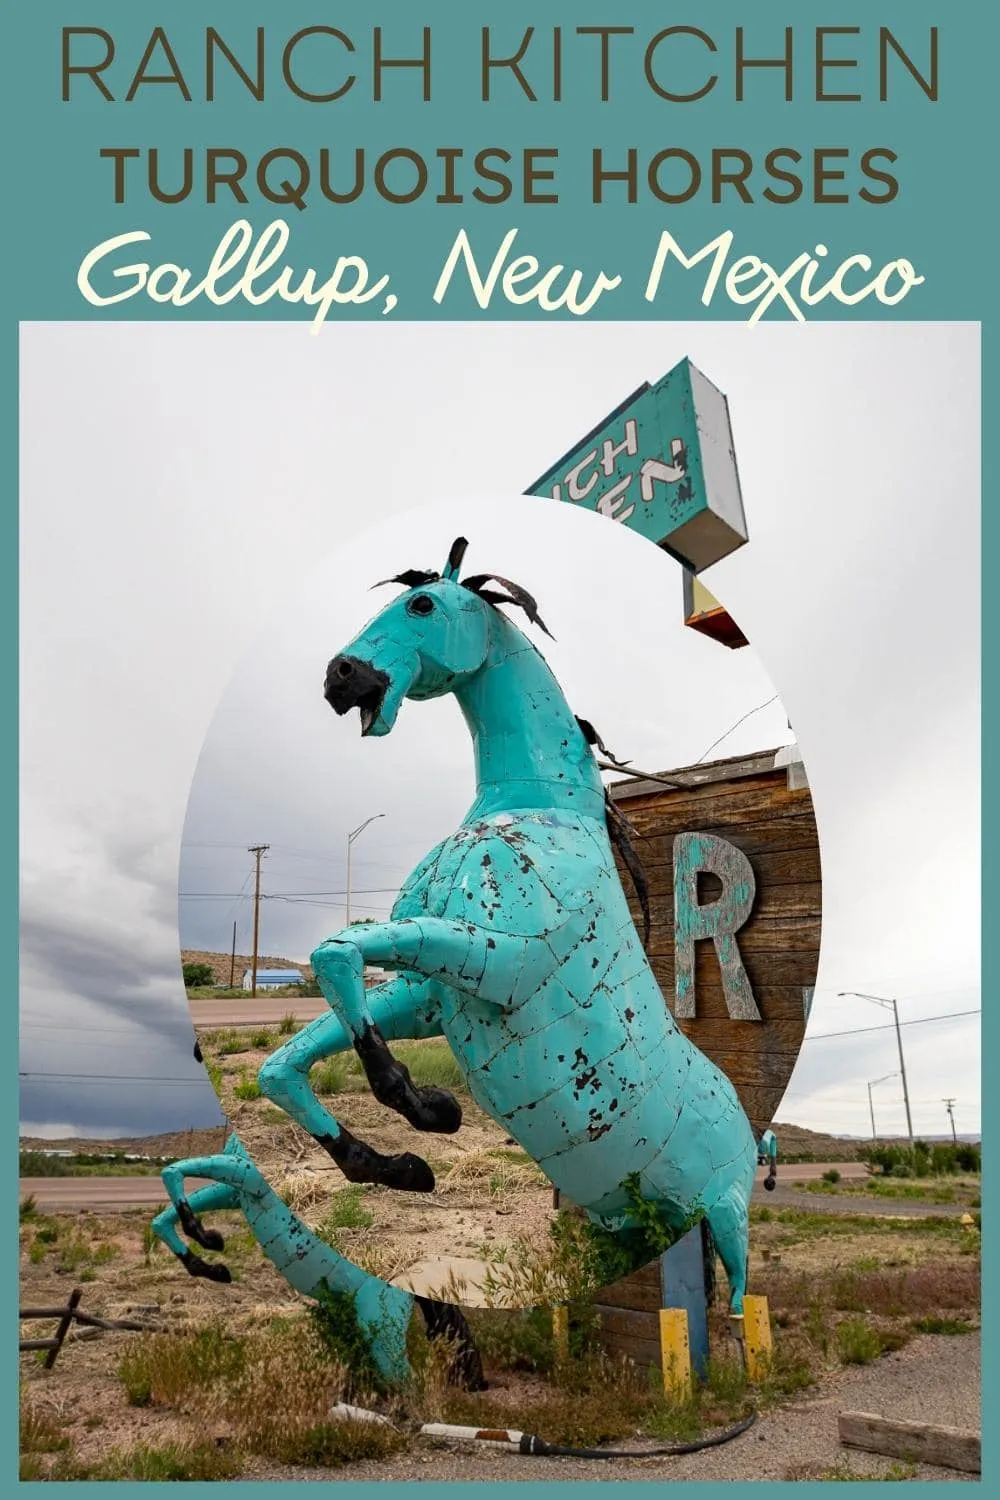 Oh hay, you're going to want to add this Route 66 roadside attraction to your road trip itinerary: the Ranch Kitchen Turquoise Horses in Gallup, New Mexico. And you heard that straight from the horse's mouth! Visit these turquoise horses while in Gallup. Visit this New Mexico Route 66 roadside attraction on your Route 66 road trip. Add it to your travel itinerary. #Route66 #Route66RoadTrip #RoadTrip #RoadsideAttraction #RoadsideAttractions #NewMexicoRoadsideAttraction